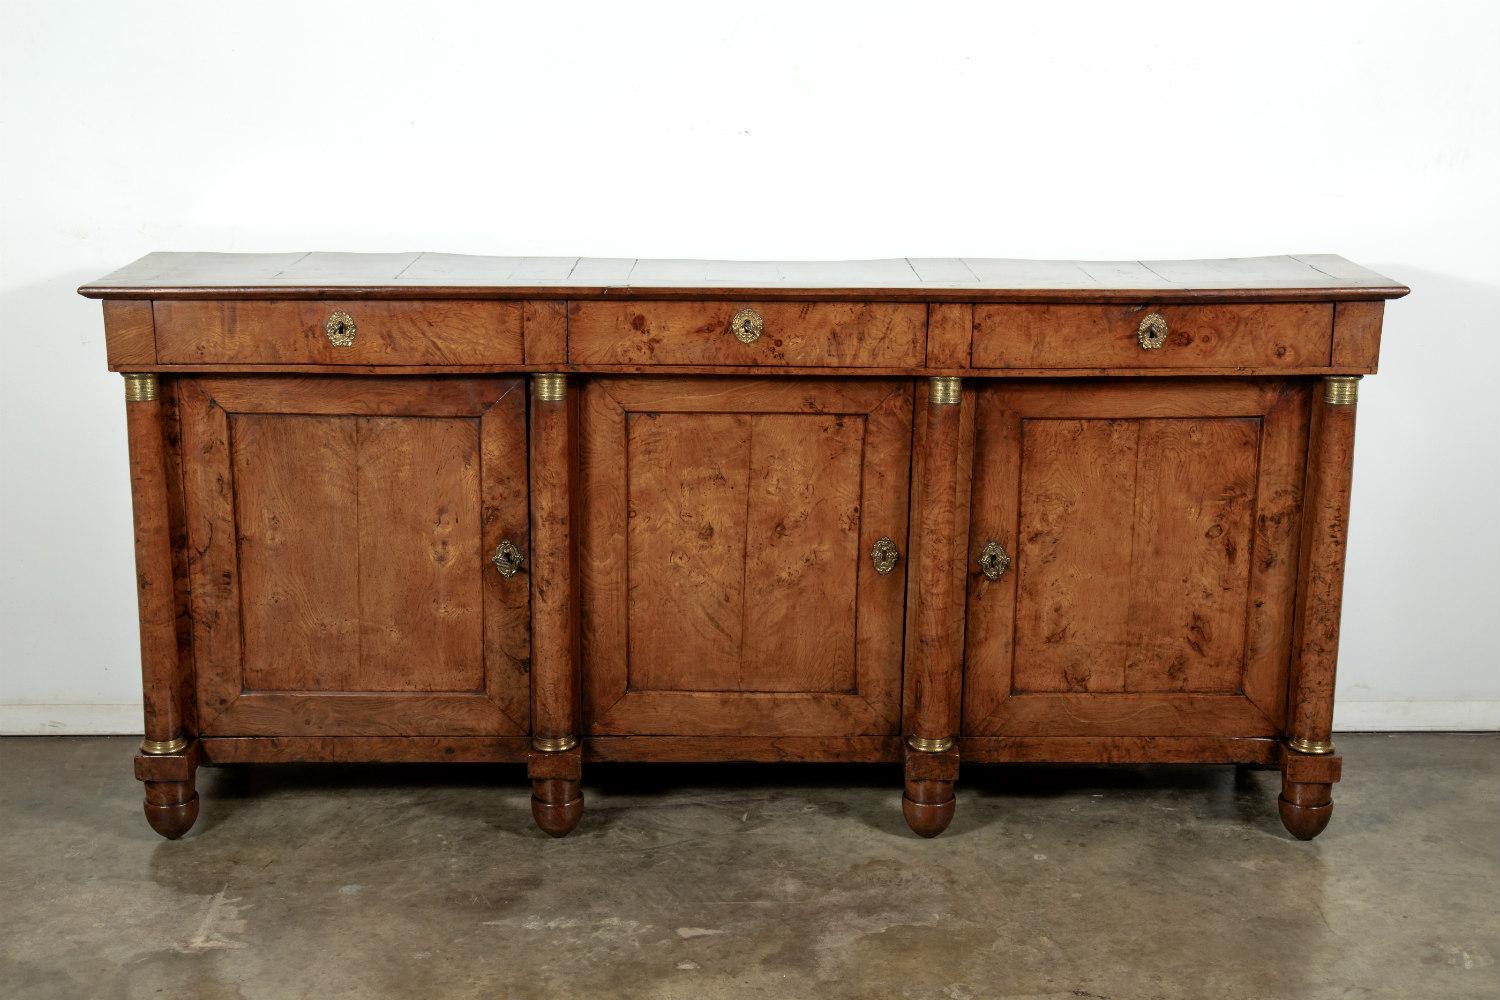 A very fine early 19th century French period Empire enfilade buffet handcrafted of burled chestnut near the Ile de France region, having three drawers over three doors flanked by support columns with original gilt-bronze capitals. Each column ending